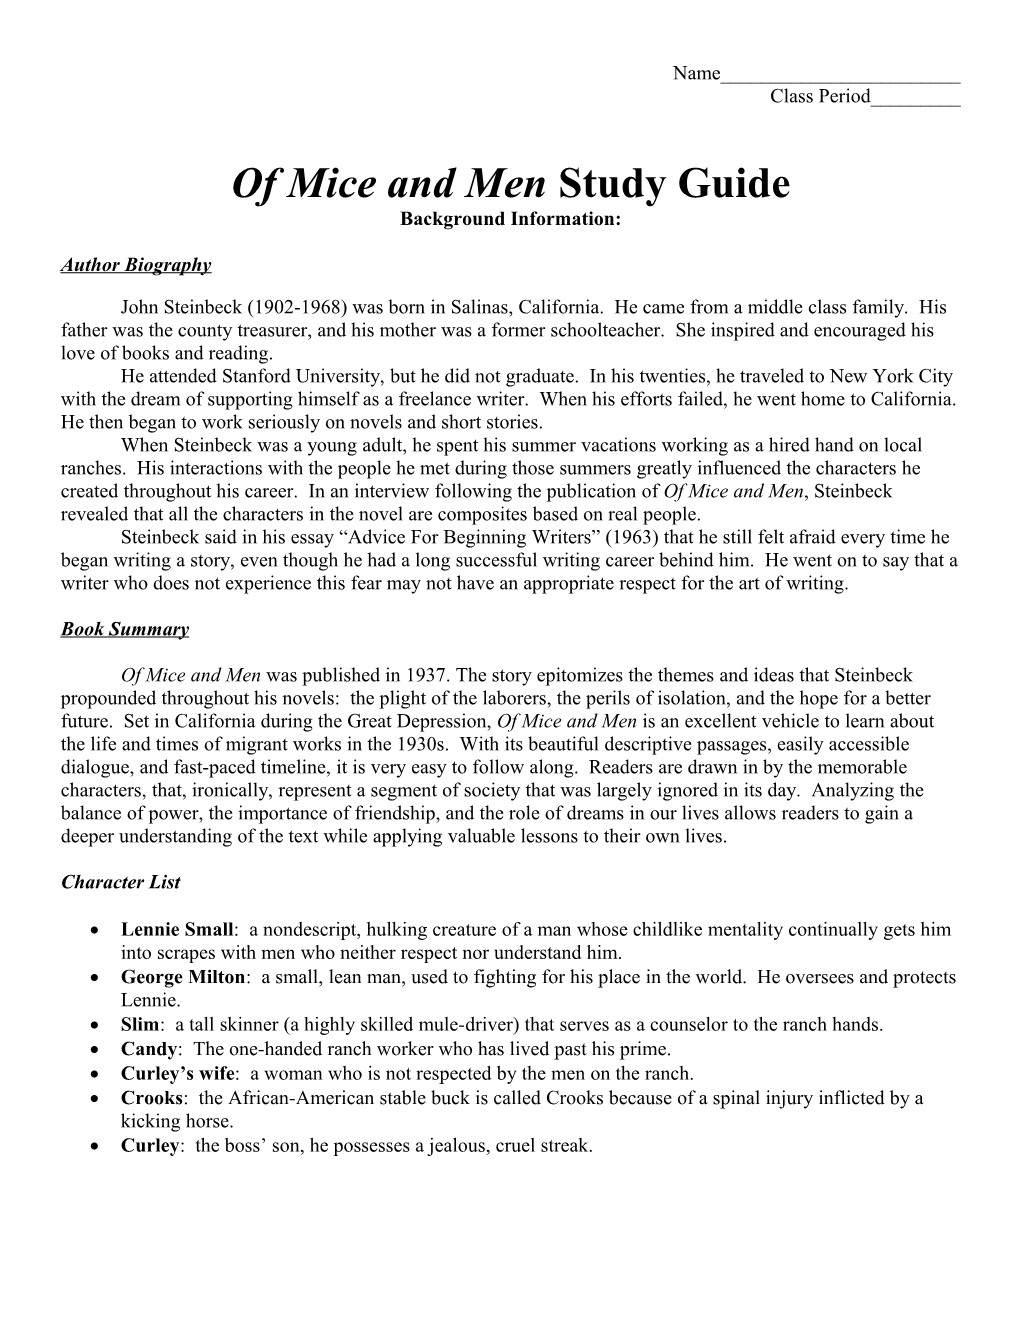 SHORT ANSWER STUDY GUIDE QUESTIONS - of Mice and Men